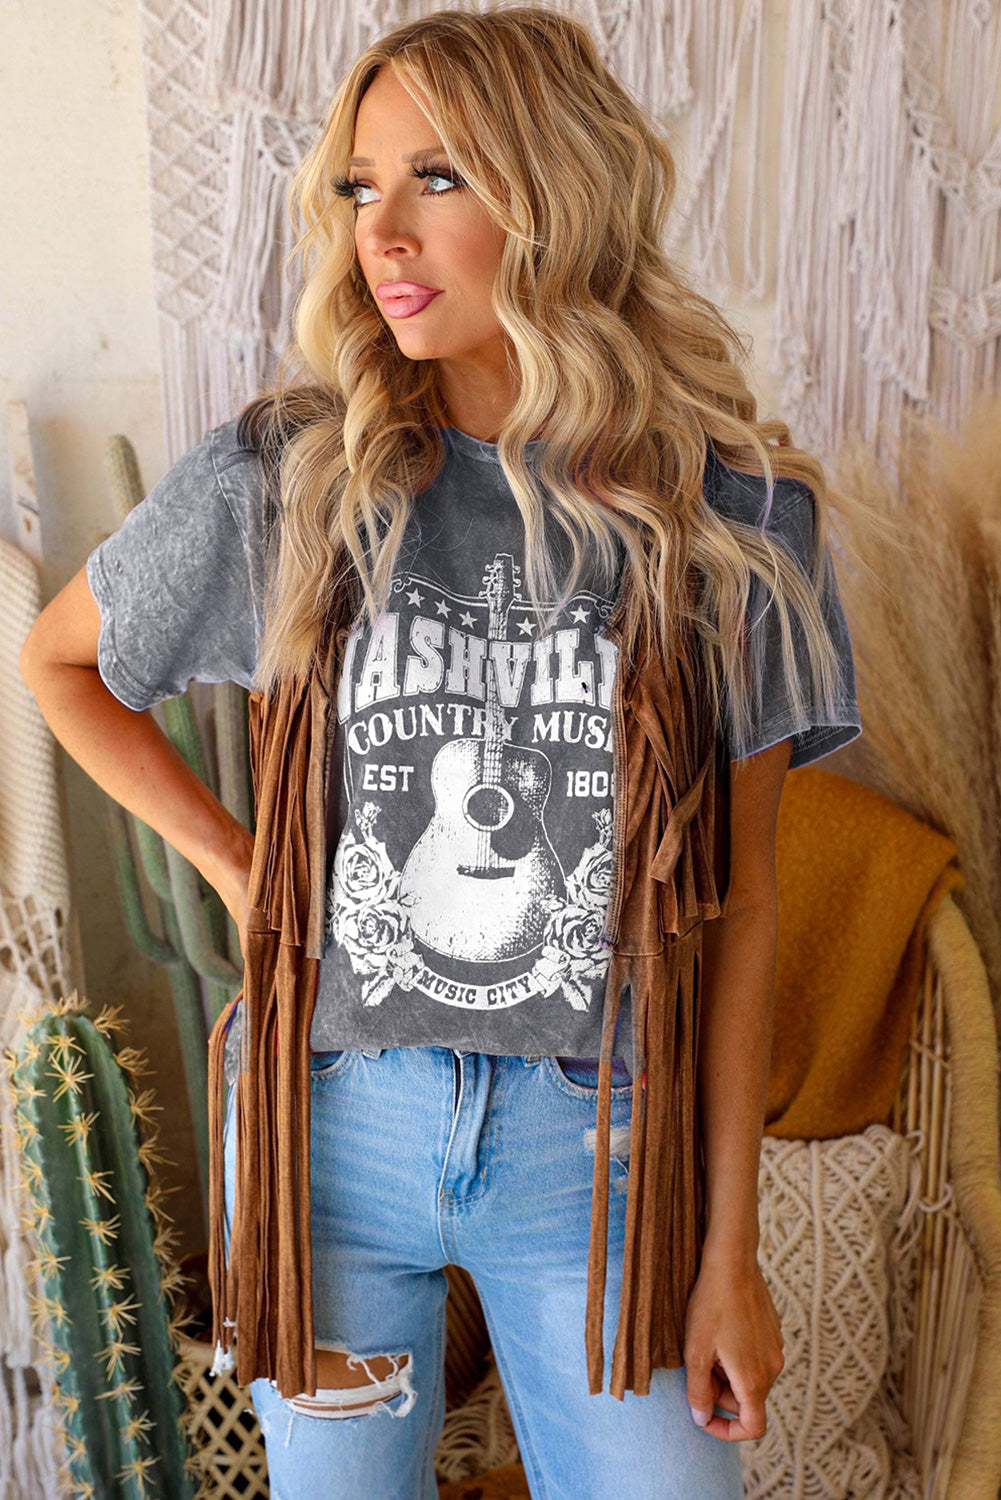 NASHVILLE COUNTRY MUSIC Graphic Round Neck Tee Shirt - Cheeky Chic Boutique